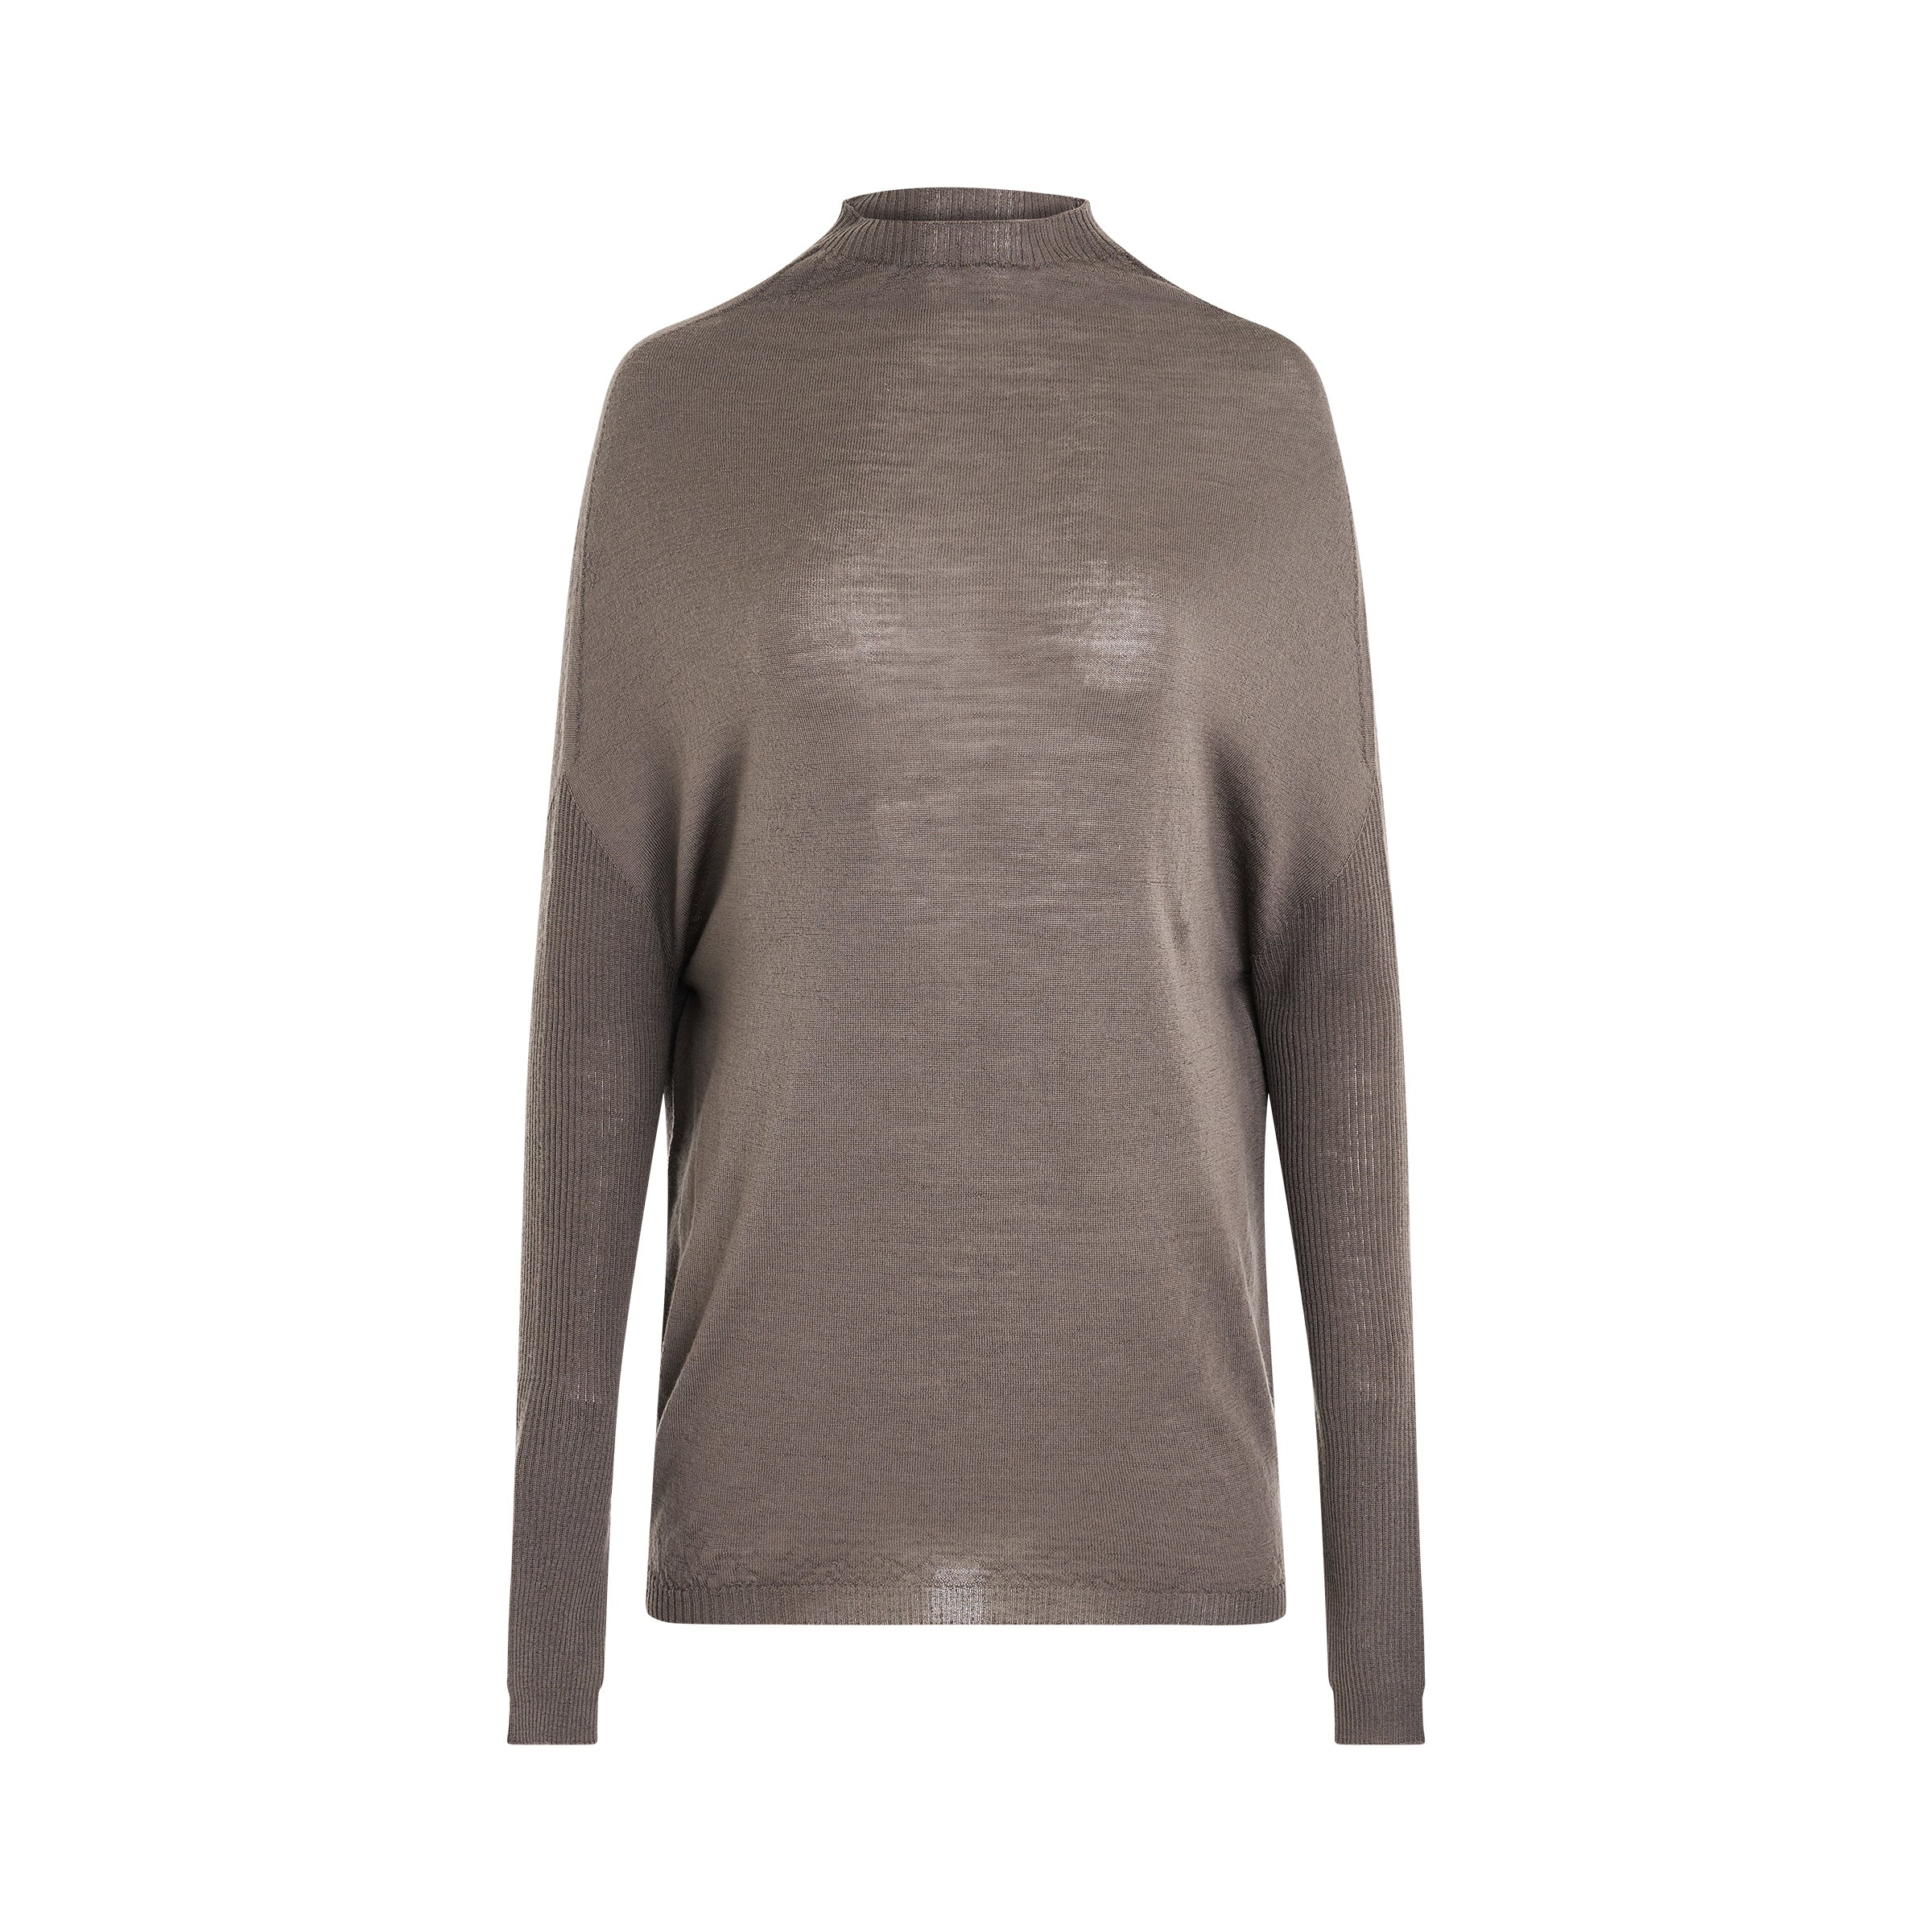 Rick Owens Light Weight Crater Knit Sweater in Dust | REVERSIBLE